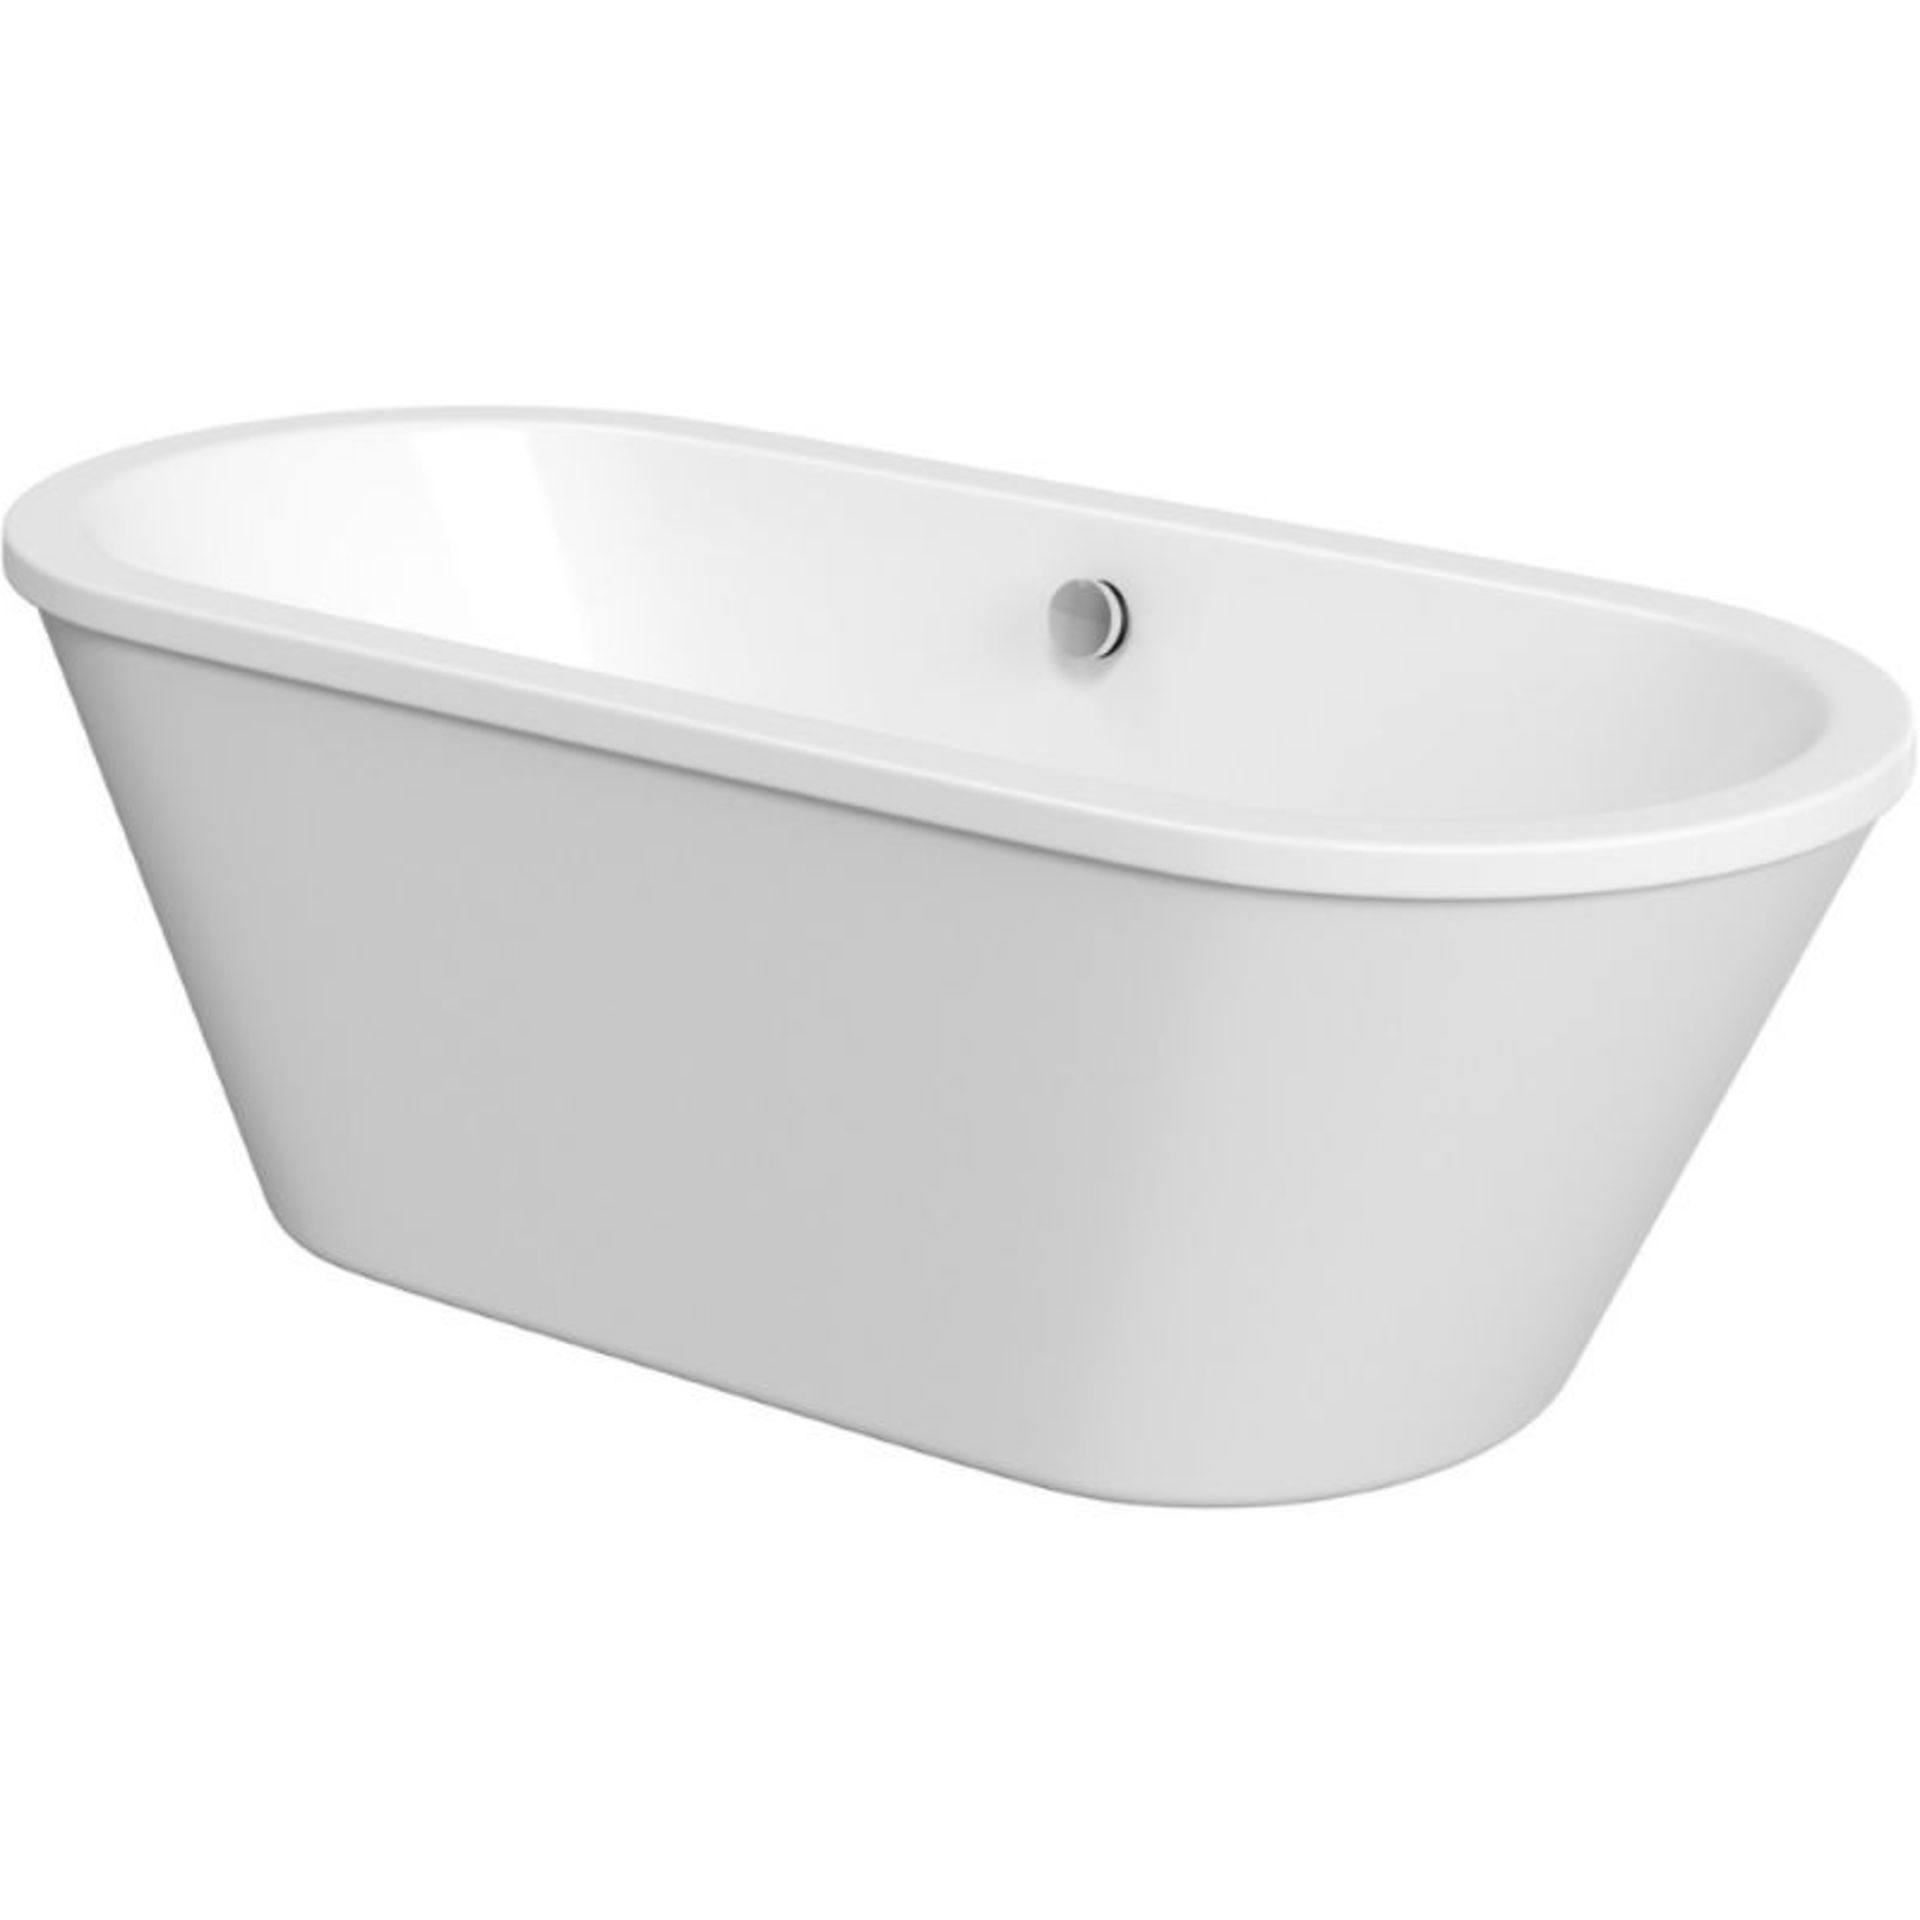 New (T7) Savoy 1700mm x 750mm Double Ended White Freestanding Bath. RRP £2,499. The Savoy Dou... - Image 2 of 2